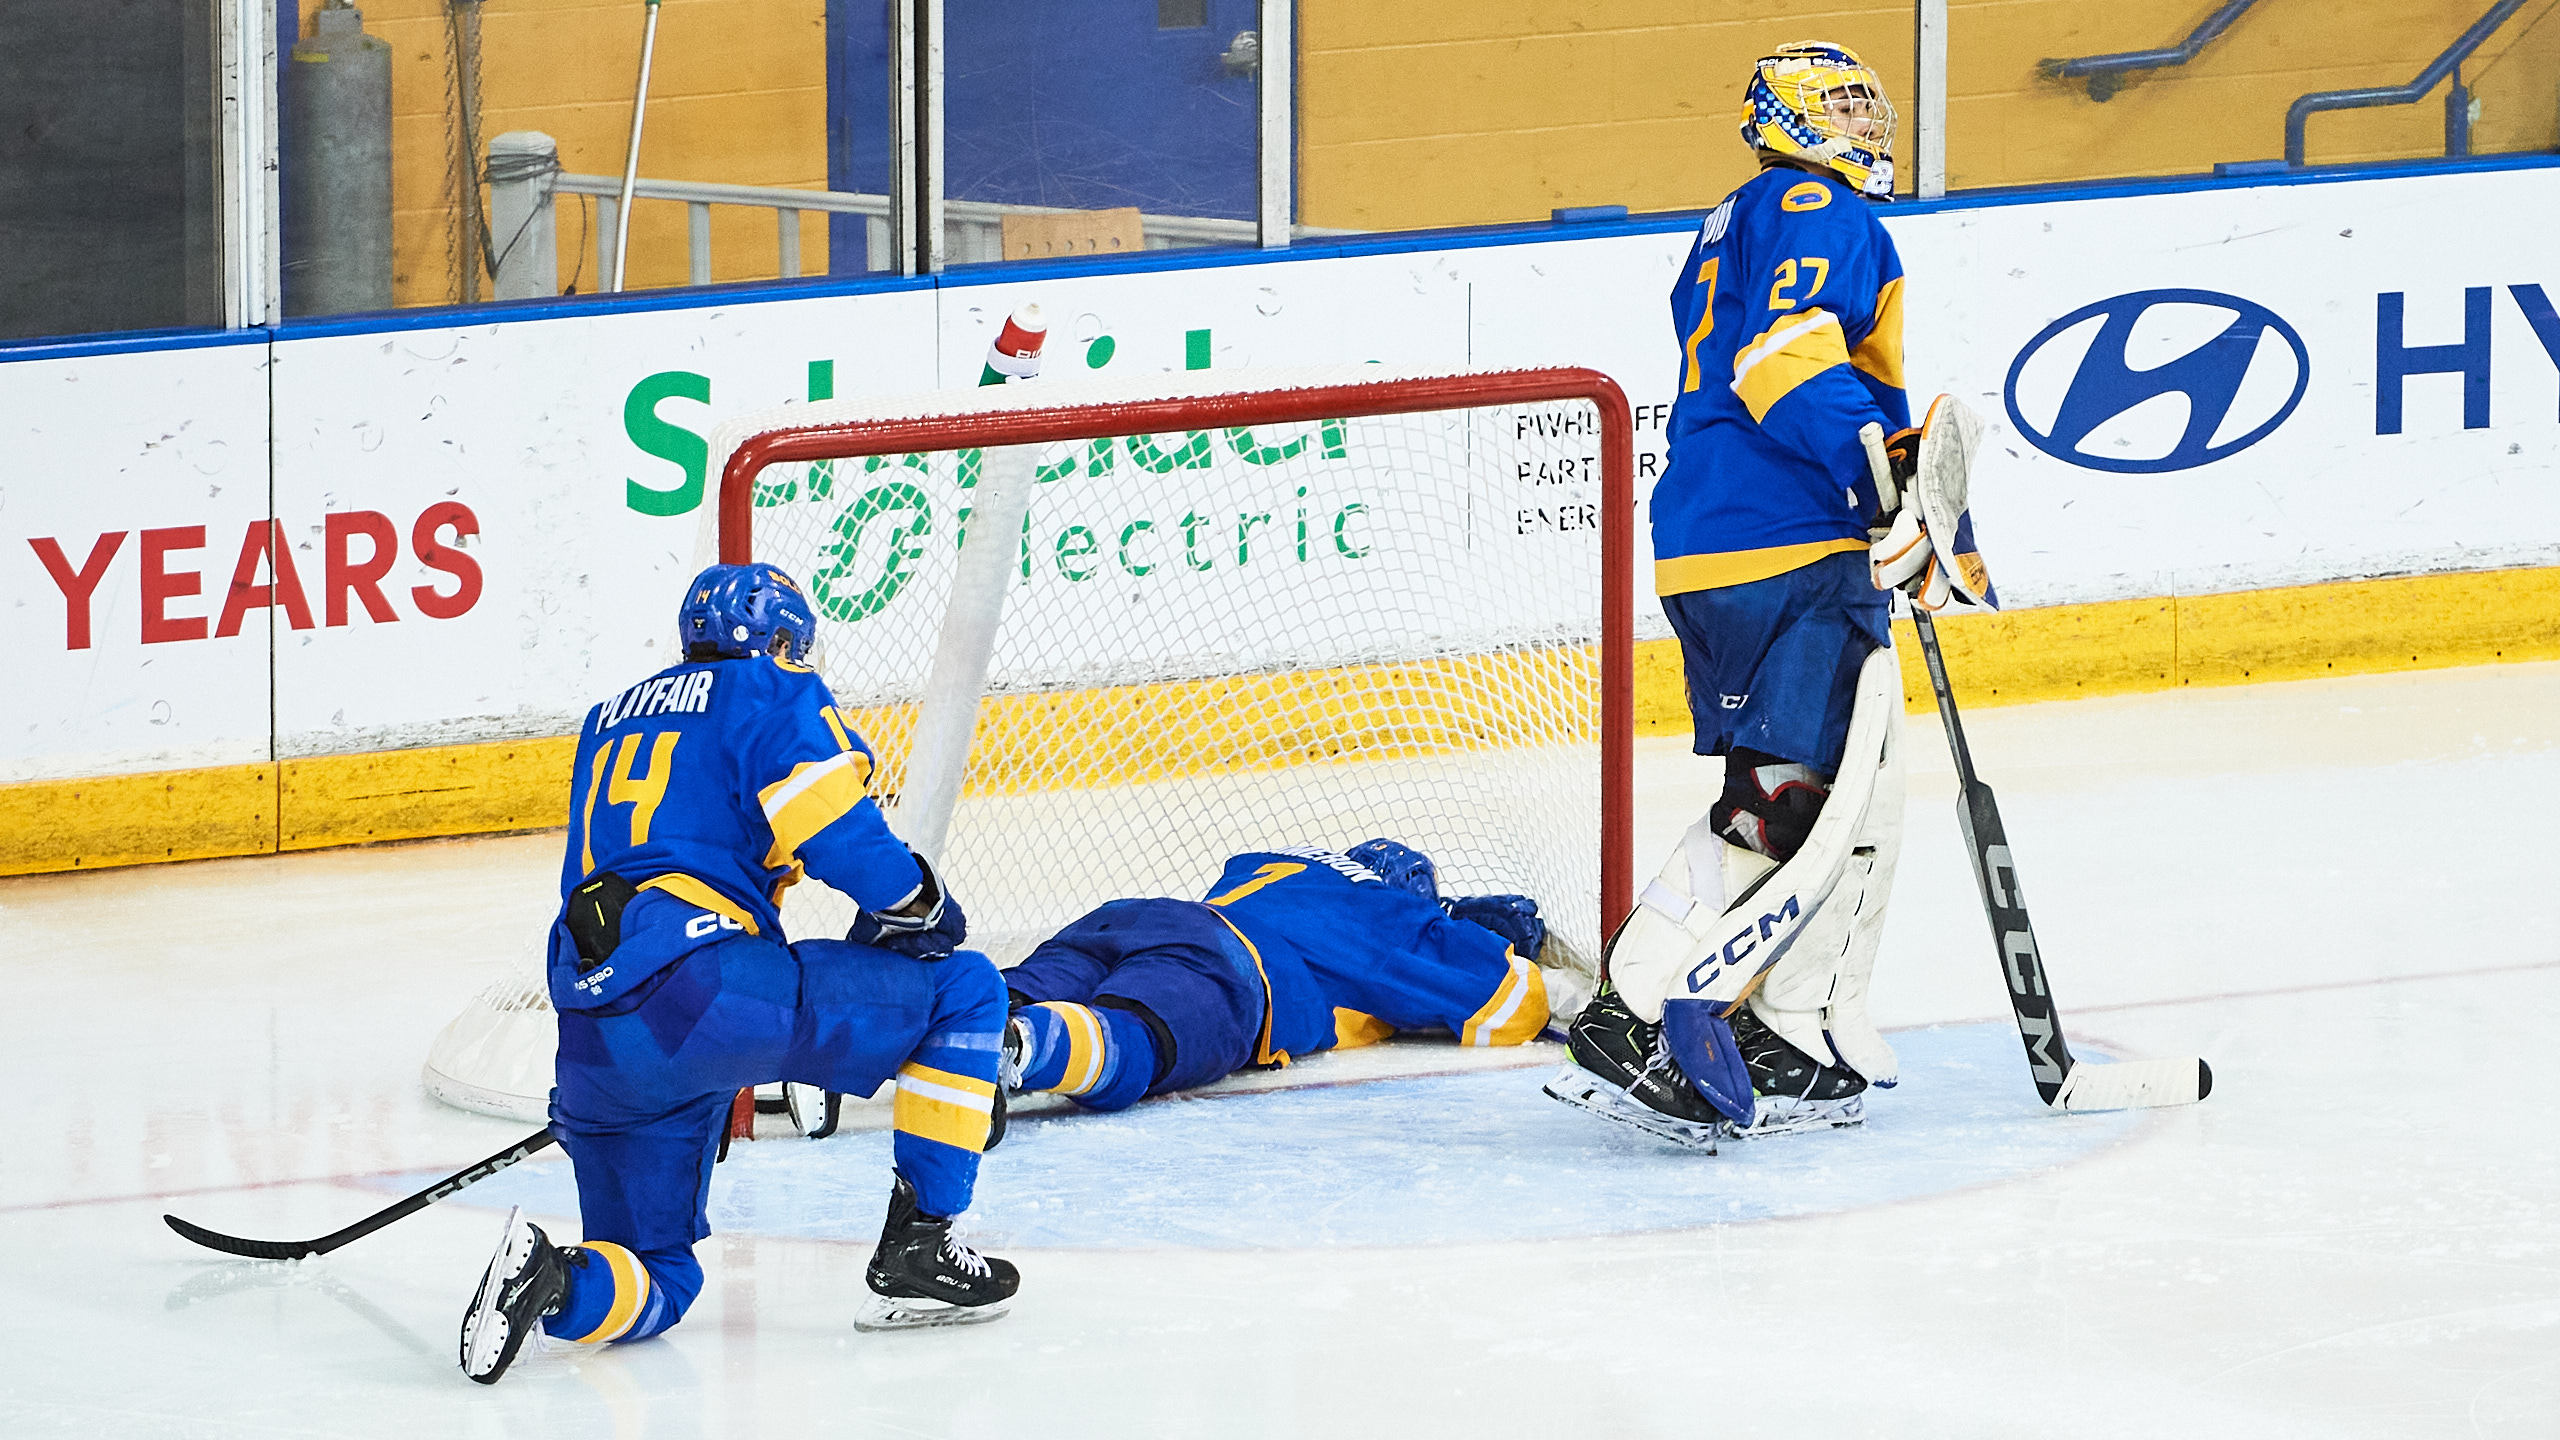 A TMU player lays face first in the net on the ice as one kneels and another skates off